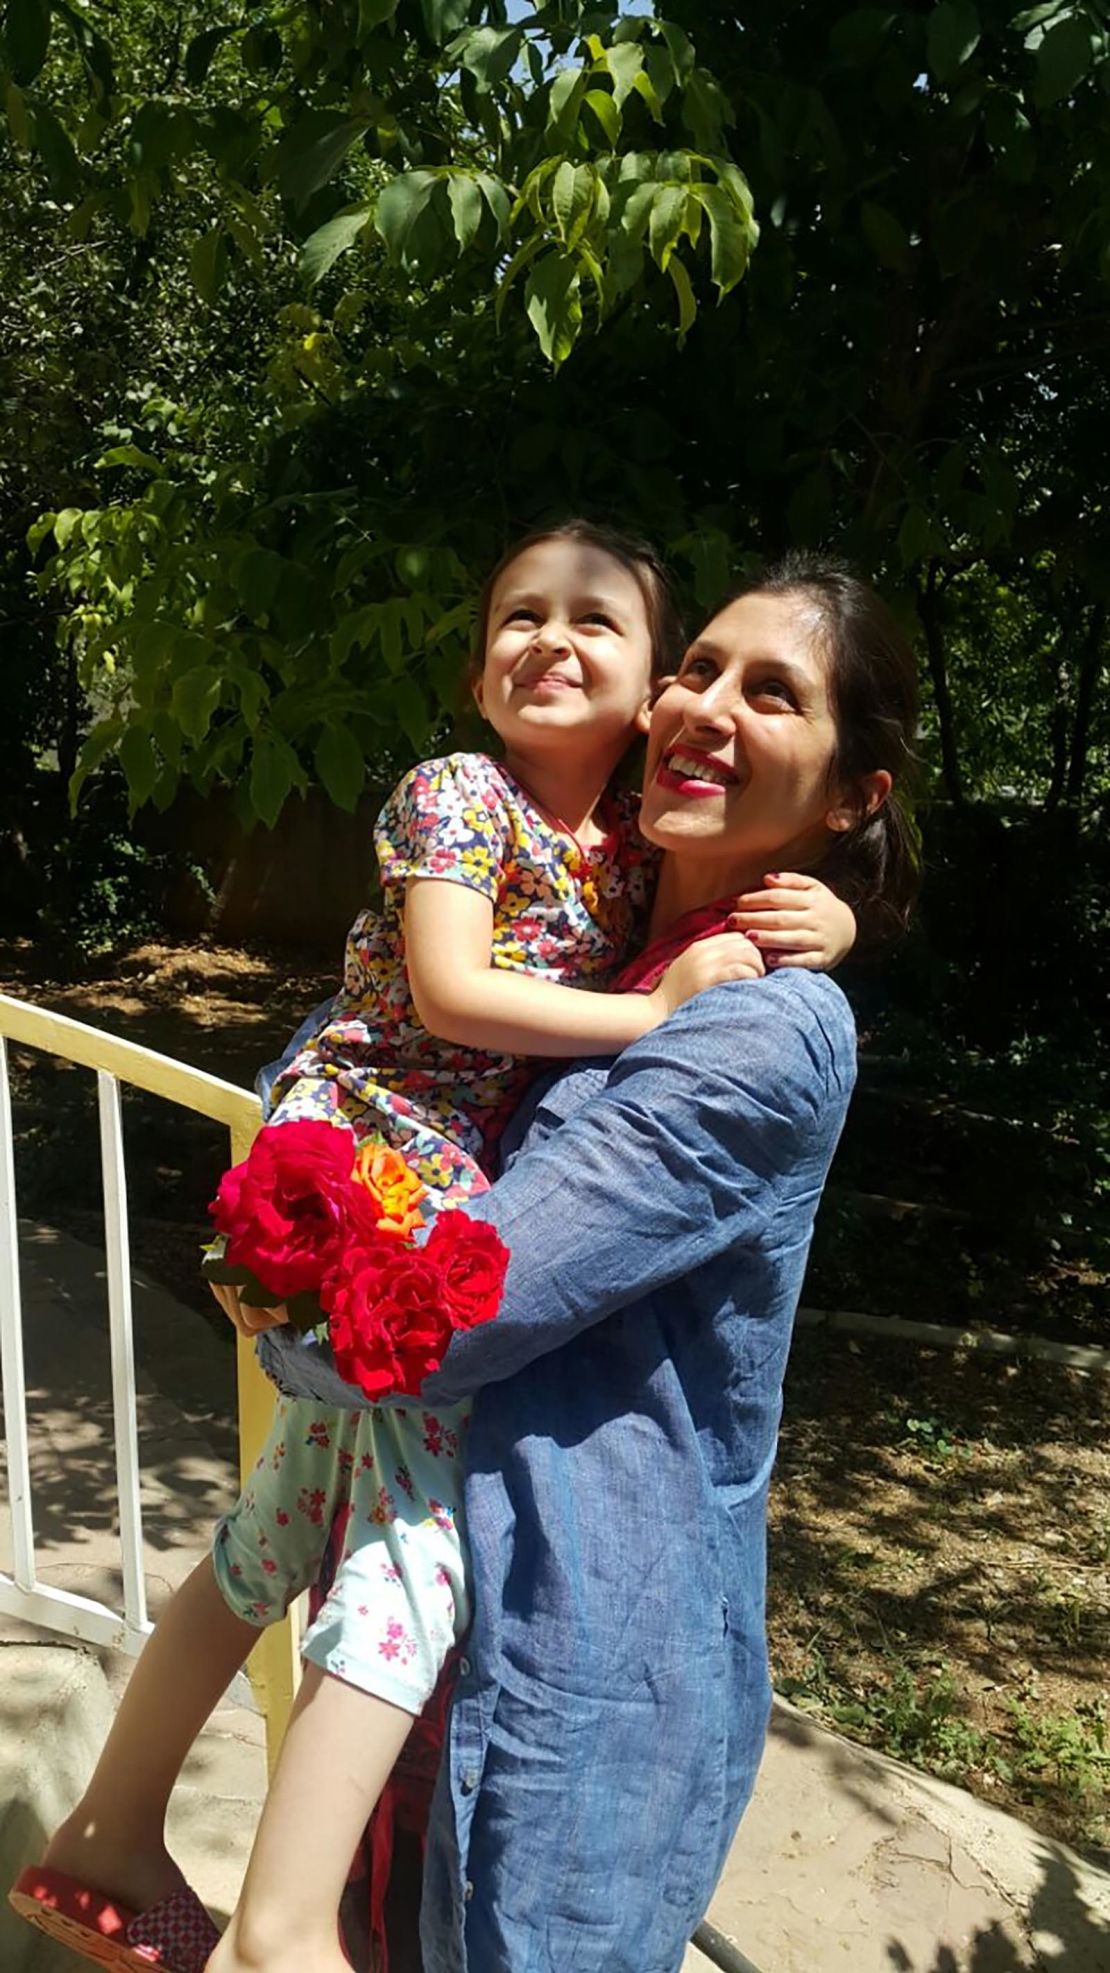 In August Zaghari-Ratcliffe was temporarily released from prison and reunited with daughter Gabriella for three days.